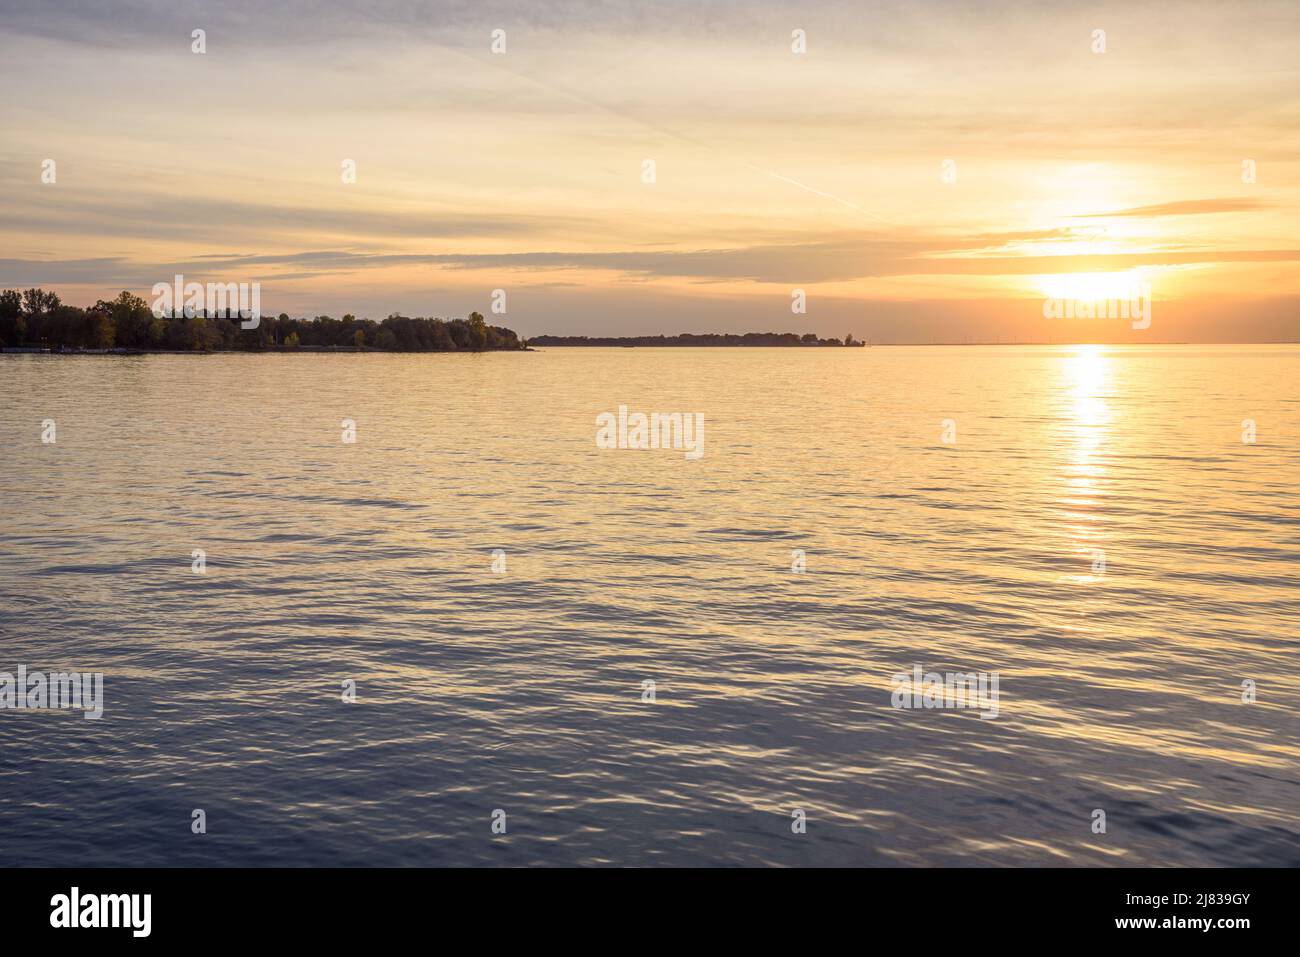 Beautiful autumn sunset over a lake. An island dotted with wind turbines in visible on horizon. Tranquil scene. Lake Ontario, Canada. Stock Photo